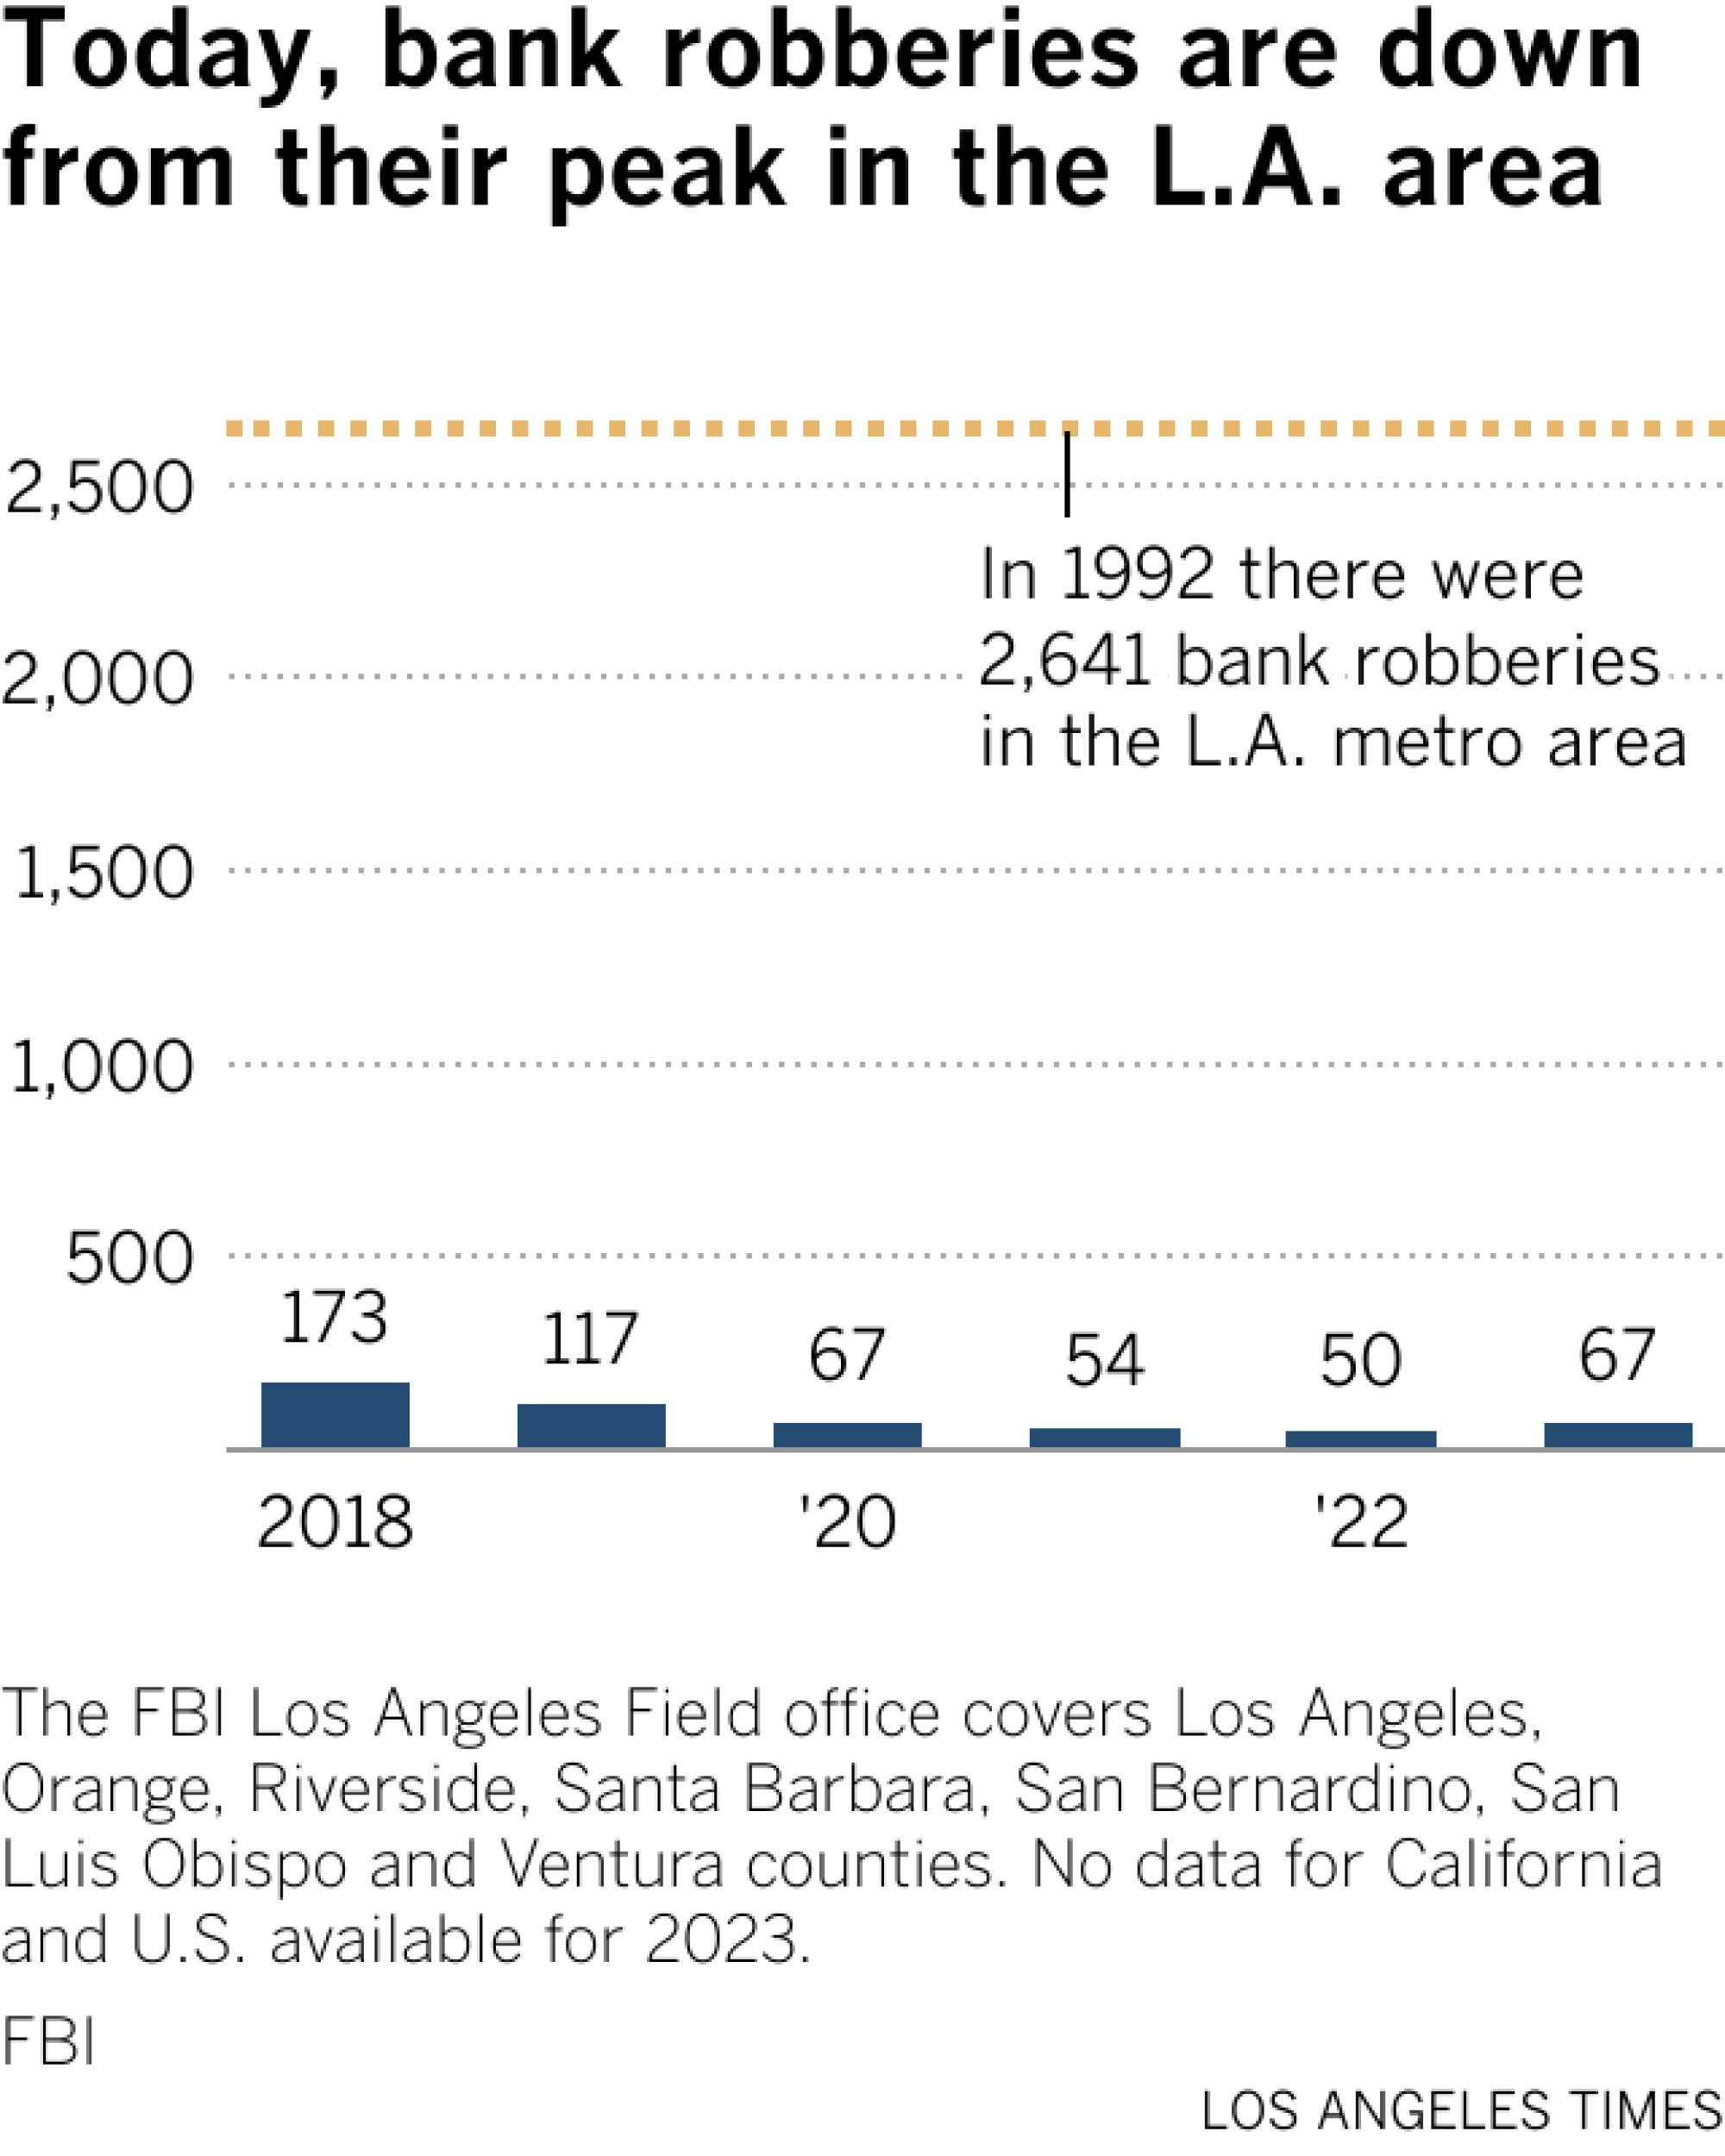 Line chart shows bank robberies in the Los Angeles metro area, California and the U.S. Since 2003, bank robberies have gone down in the United States from 7,465 in 2003 to 1,612 in 2022. Likewise in California, where there were 1,153 in 2003 and 172 in 2022. The FBI's Los Angeles Field Office reported that in 1992 there were 2,641 bank robberies in the L.A. area alone. By 2018, there were 173 and, most recently,  there were 67 bank robberies in 2023.